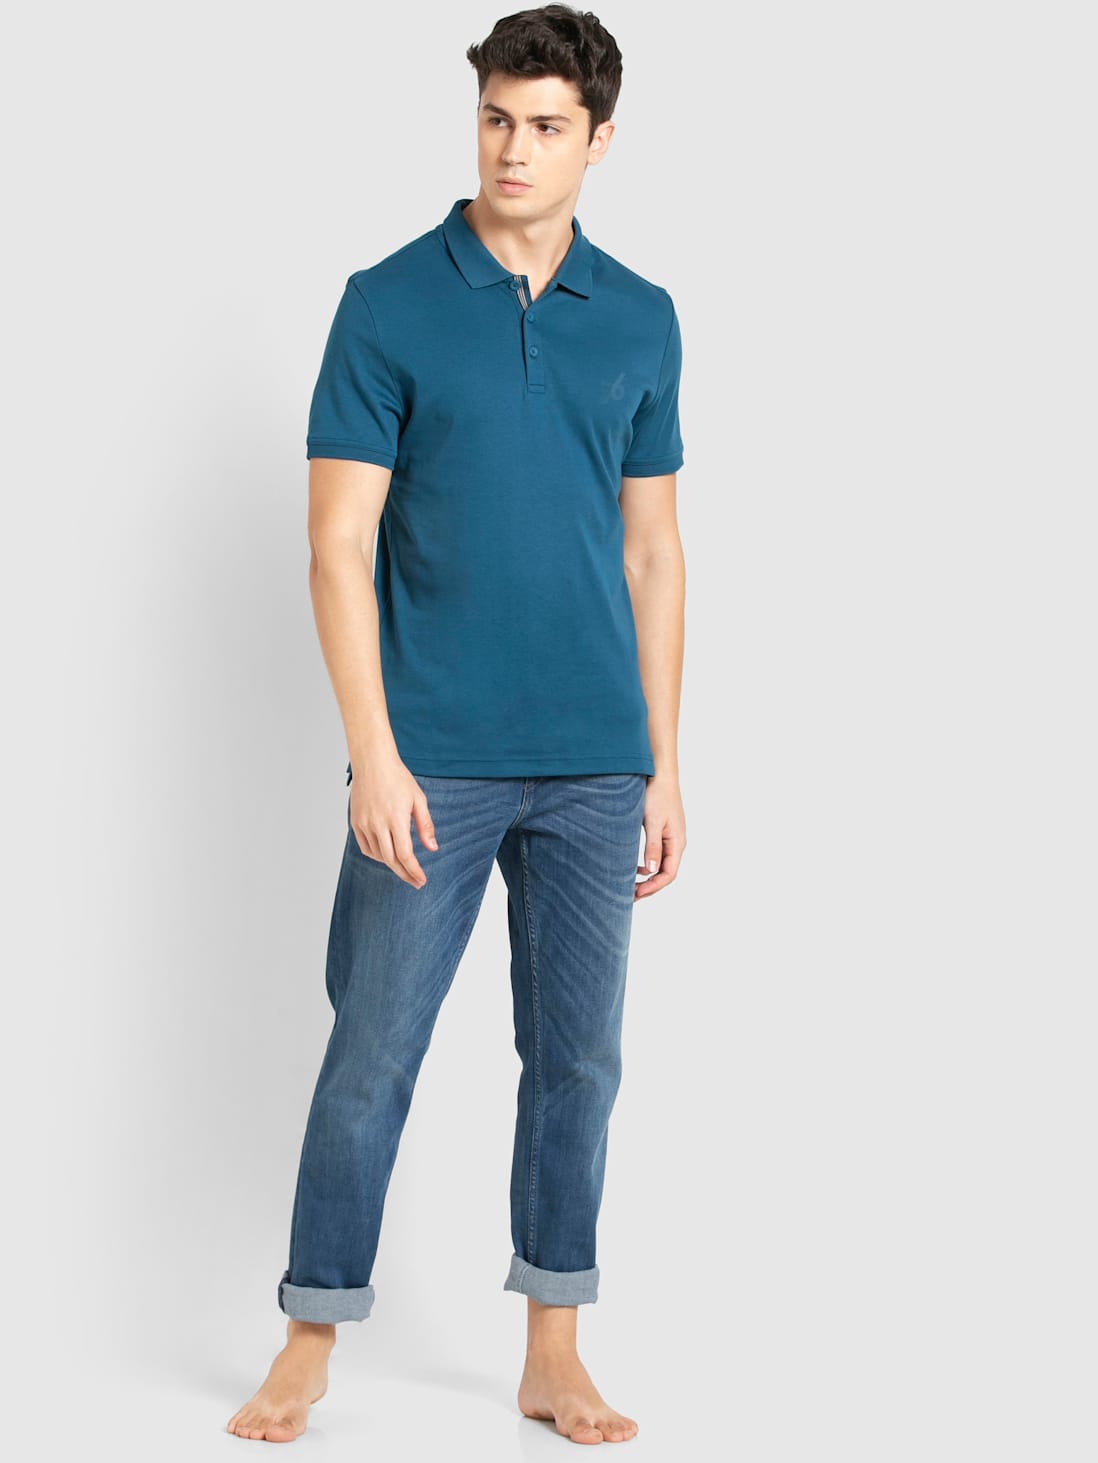 Seaport Teal Solid Half Sleeve Polo Sports T-Shirt for Men 3911 ...